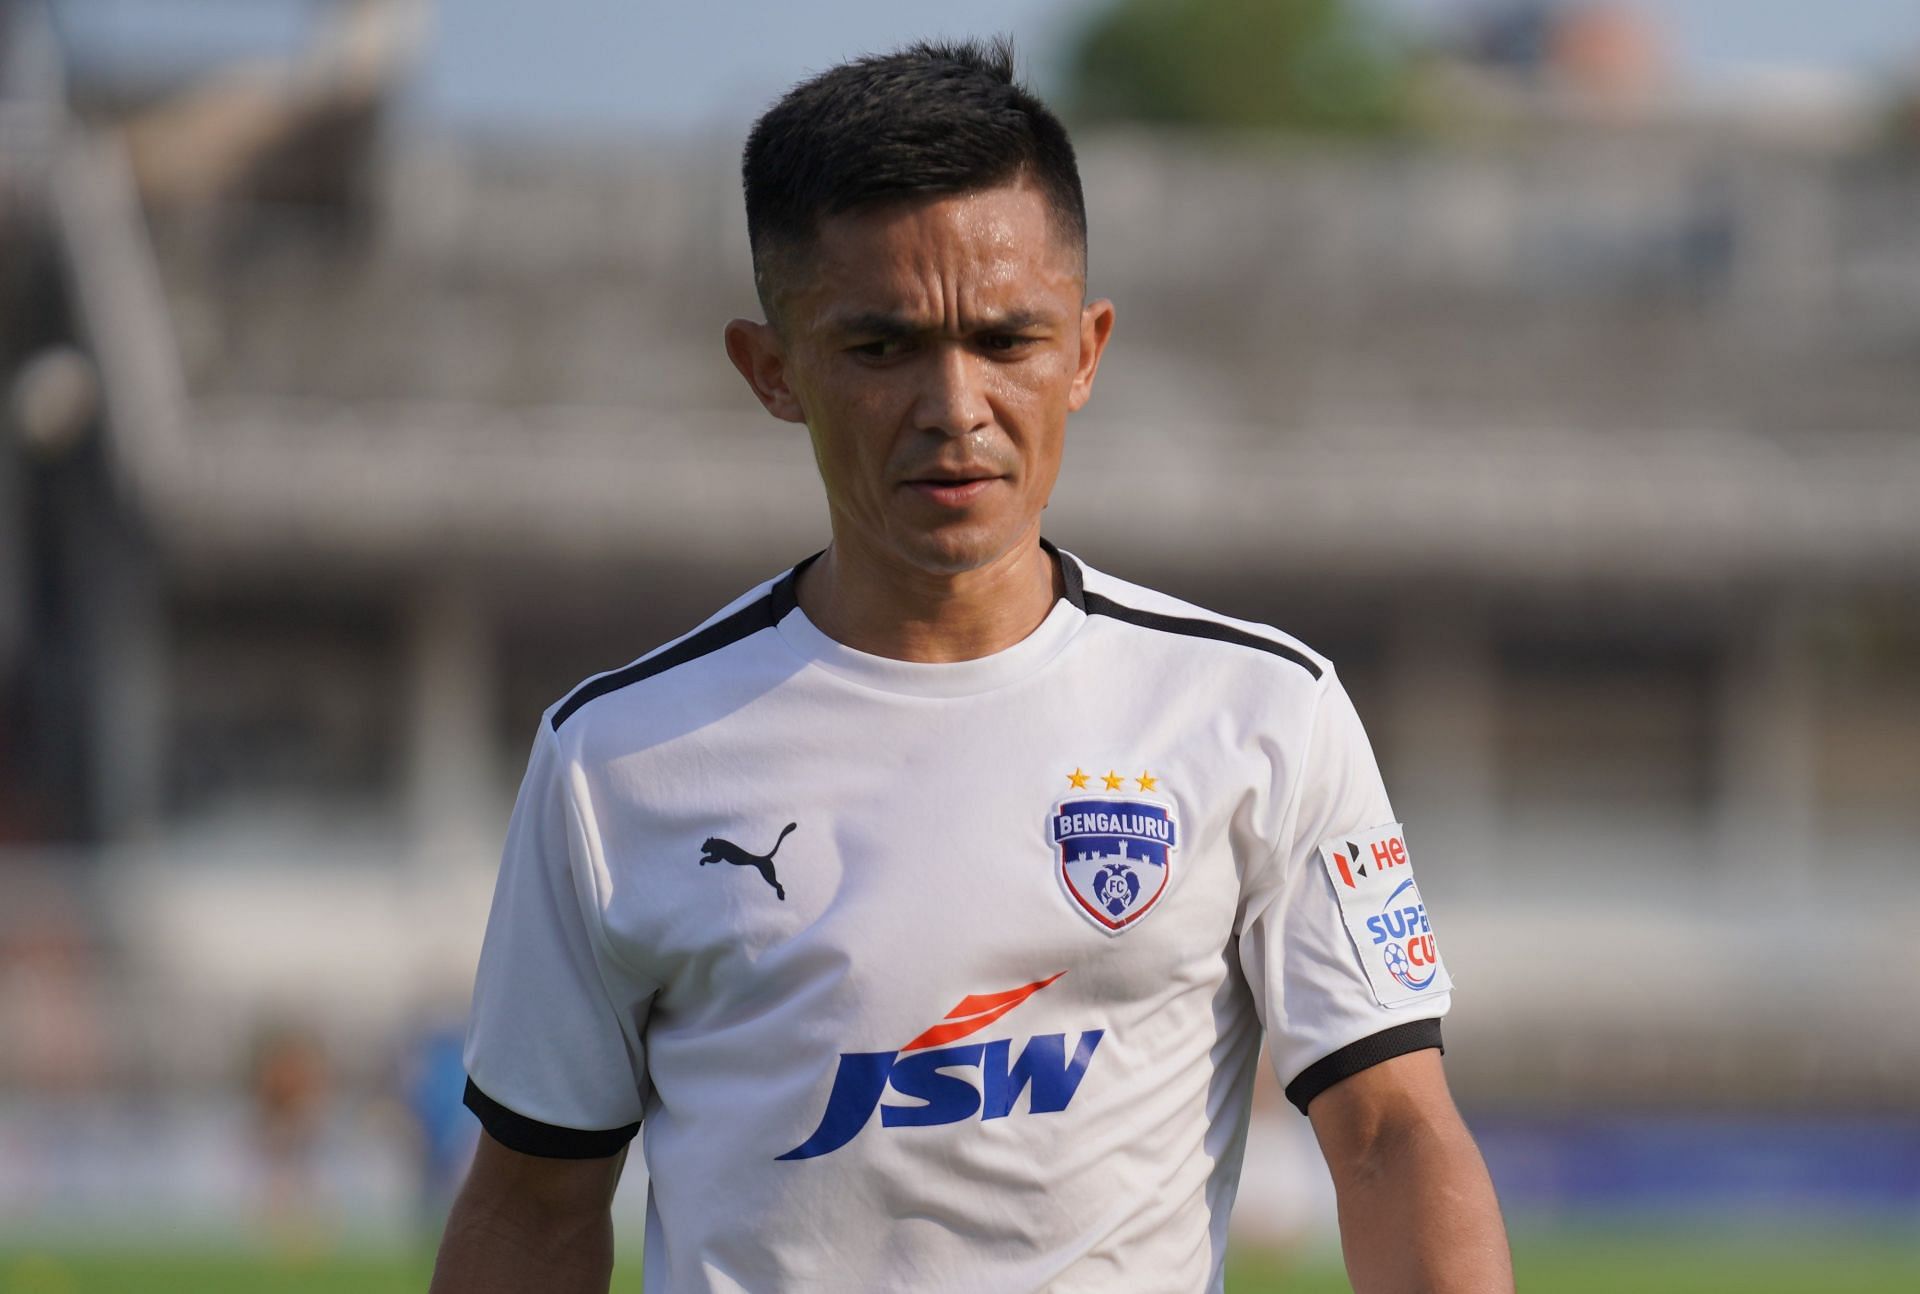 Bengaluru FC started their Hero Super Cup campaign with a draw.